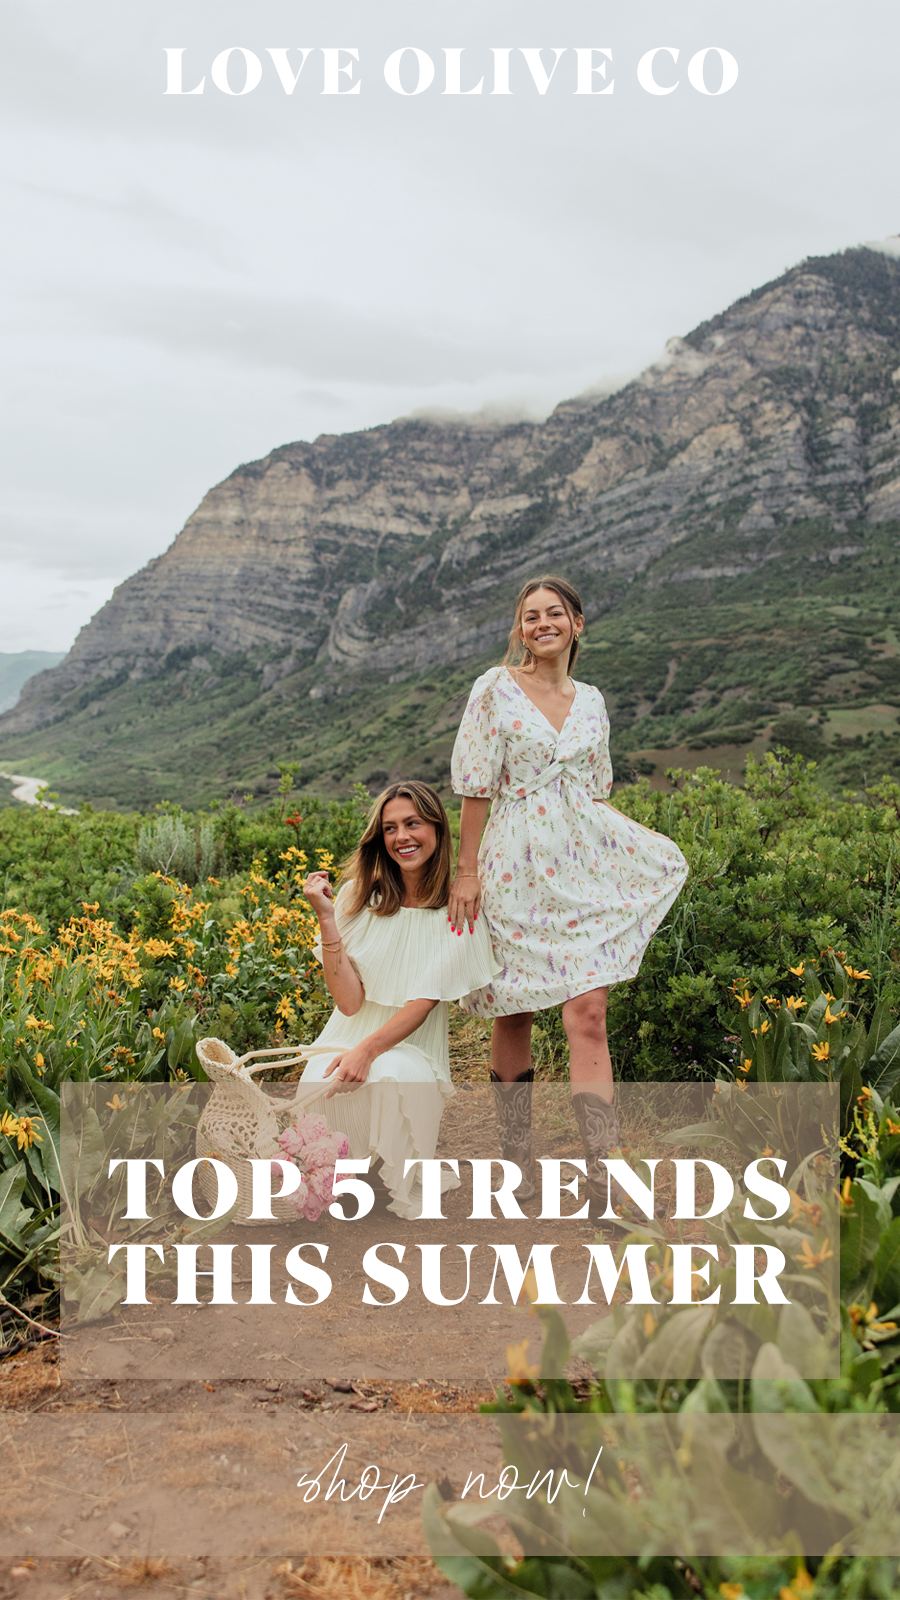 Top 5 Trends This Summer